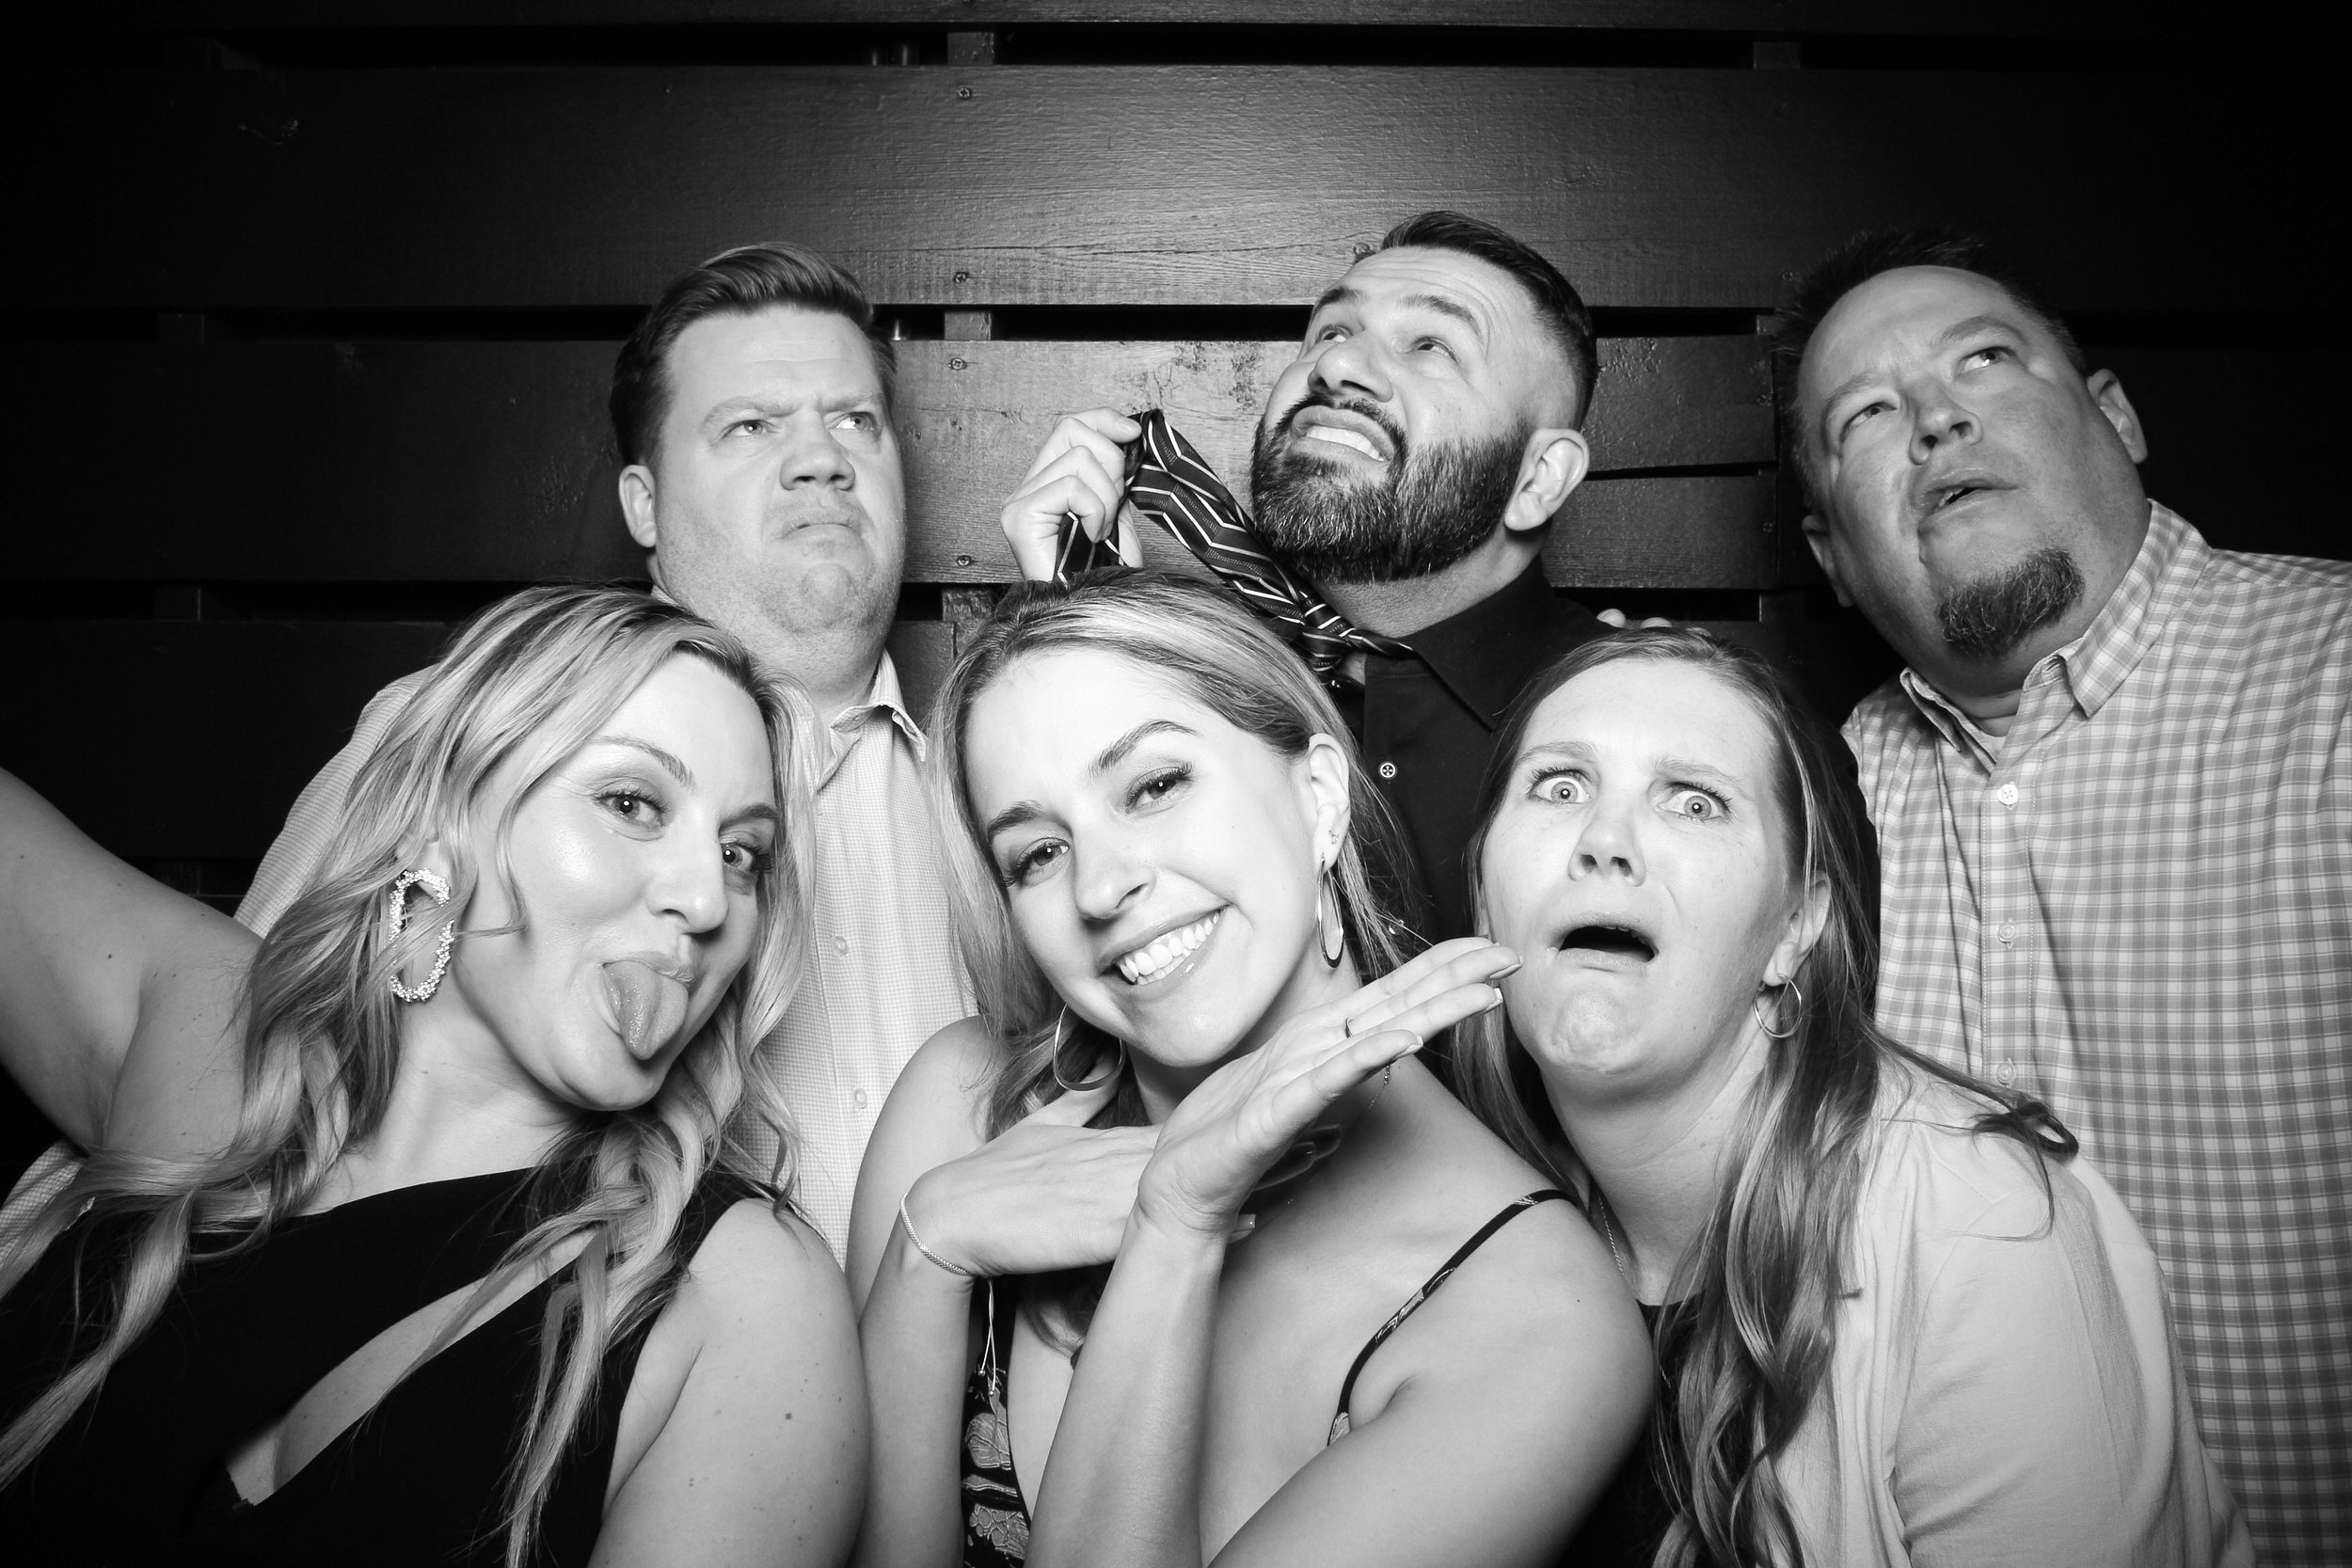 Fotio_Photo_Booth_Chicago_Winery_Clark_Street_Party_Family_Fun_Terrace_Superfans_River_North_15.jpg